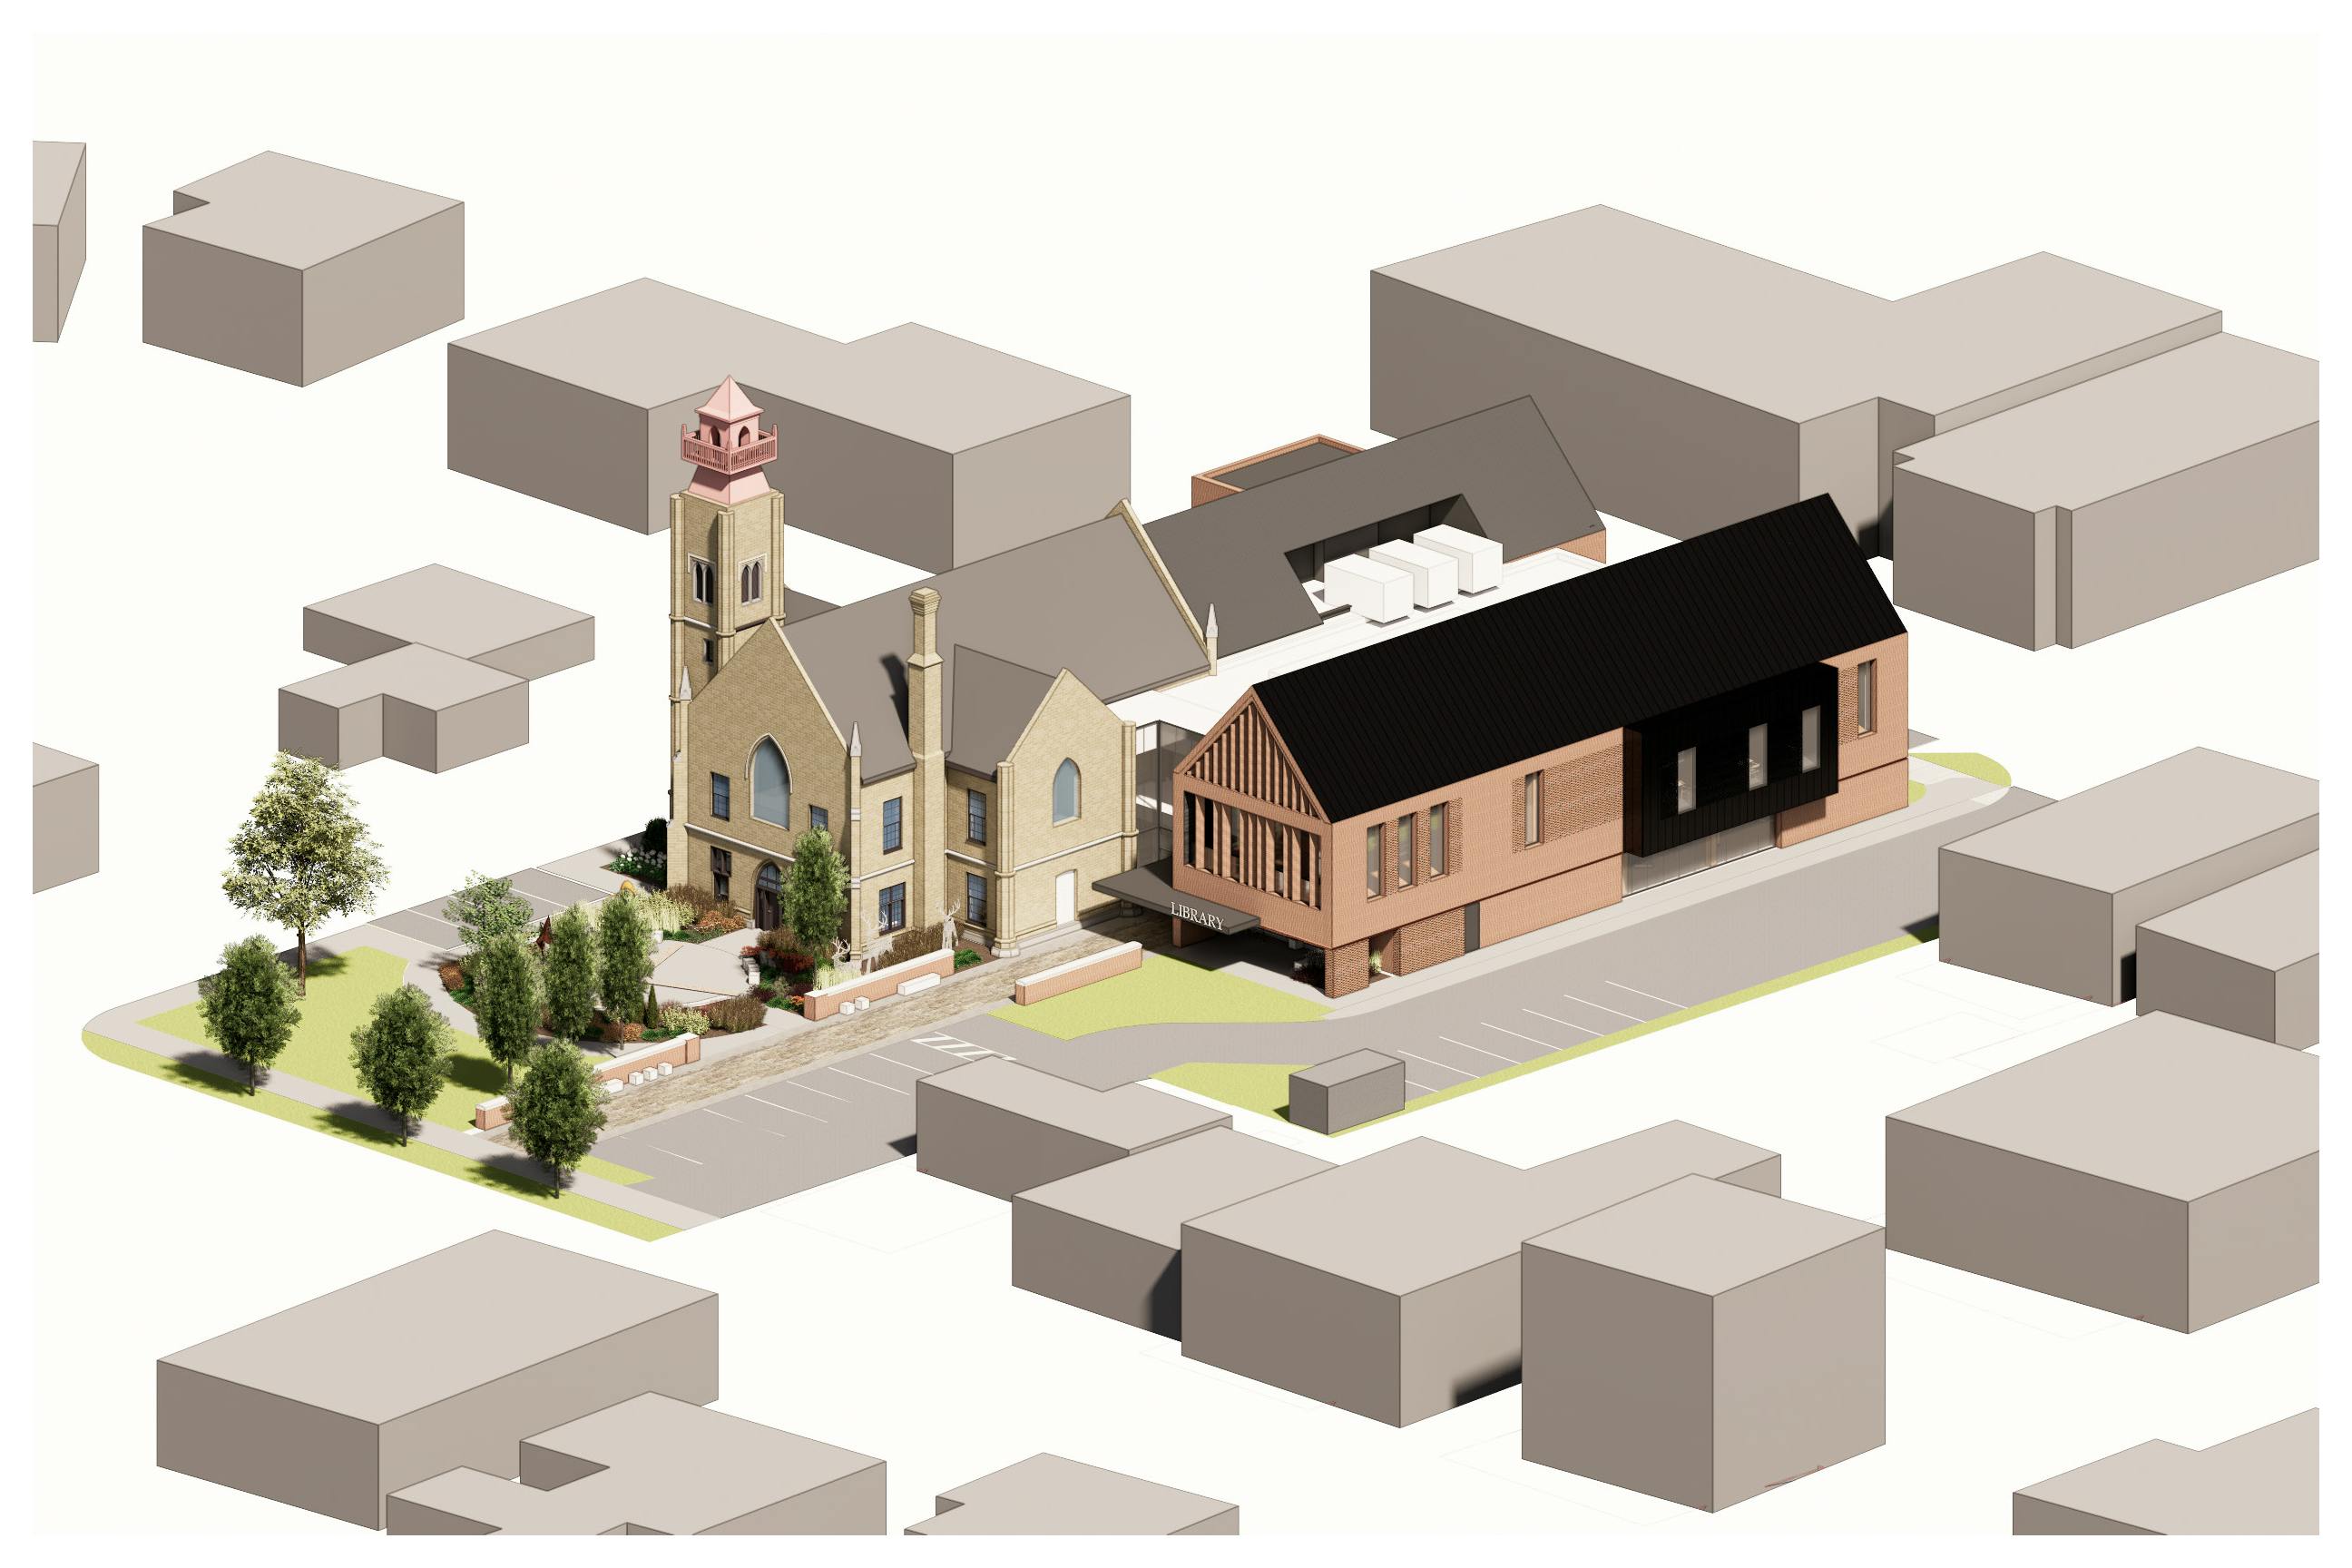 Image featuring new Main Branch Library's proposed exterior.png